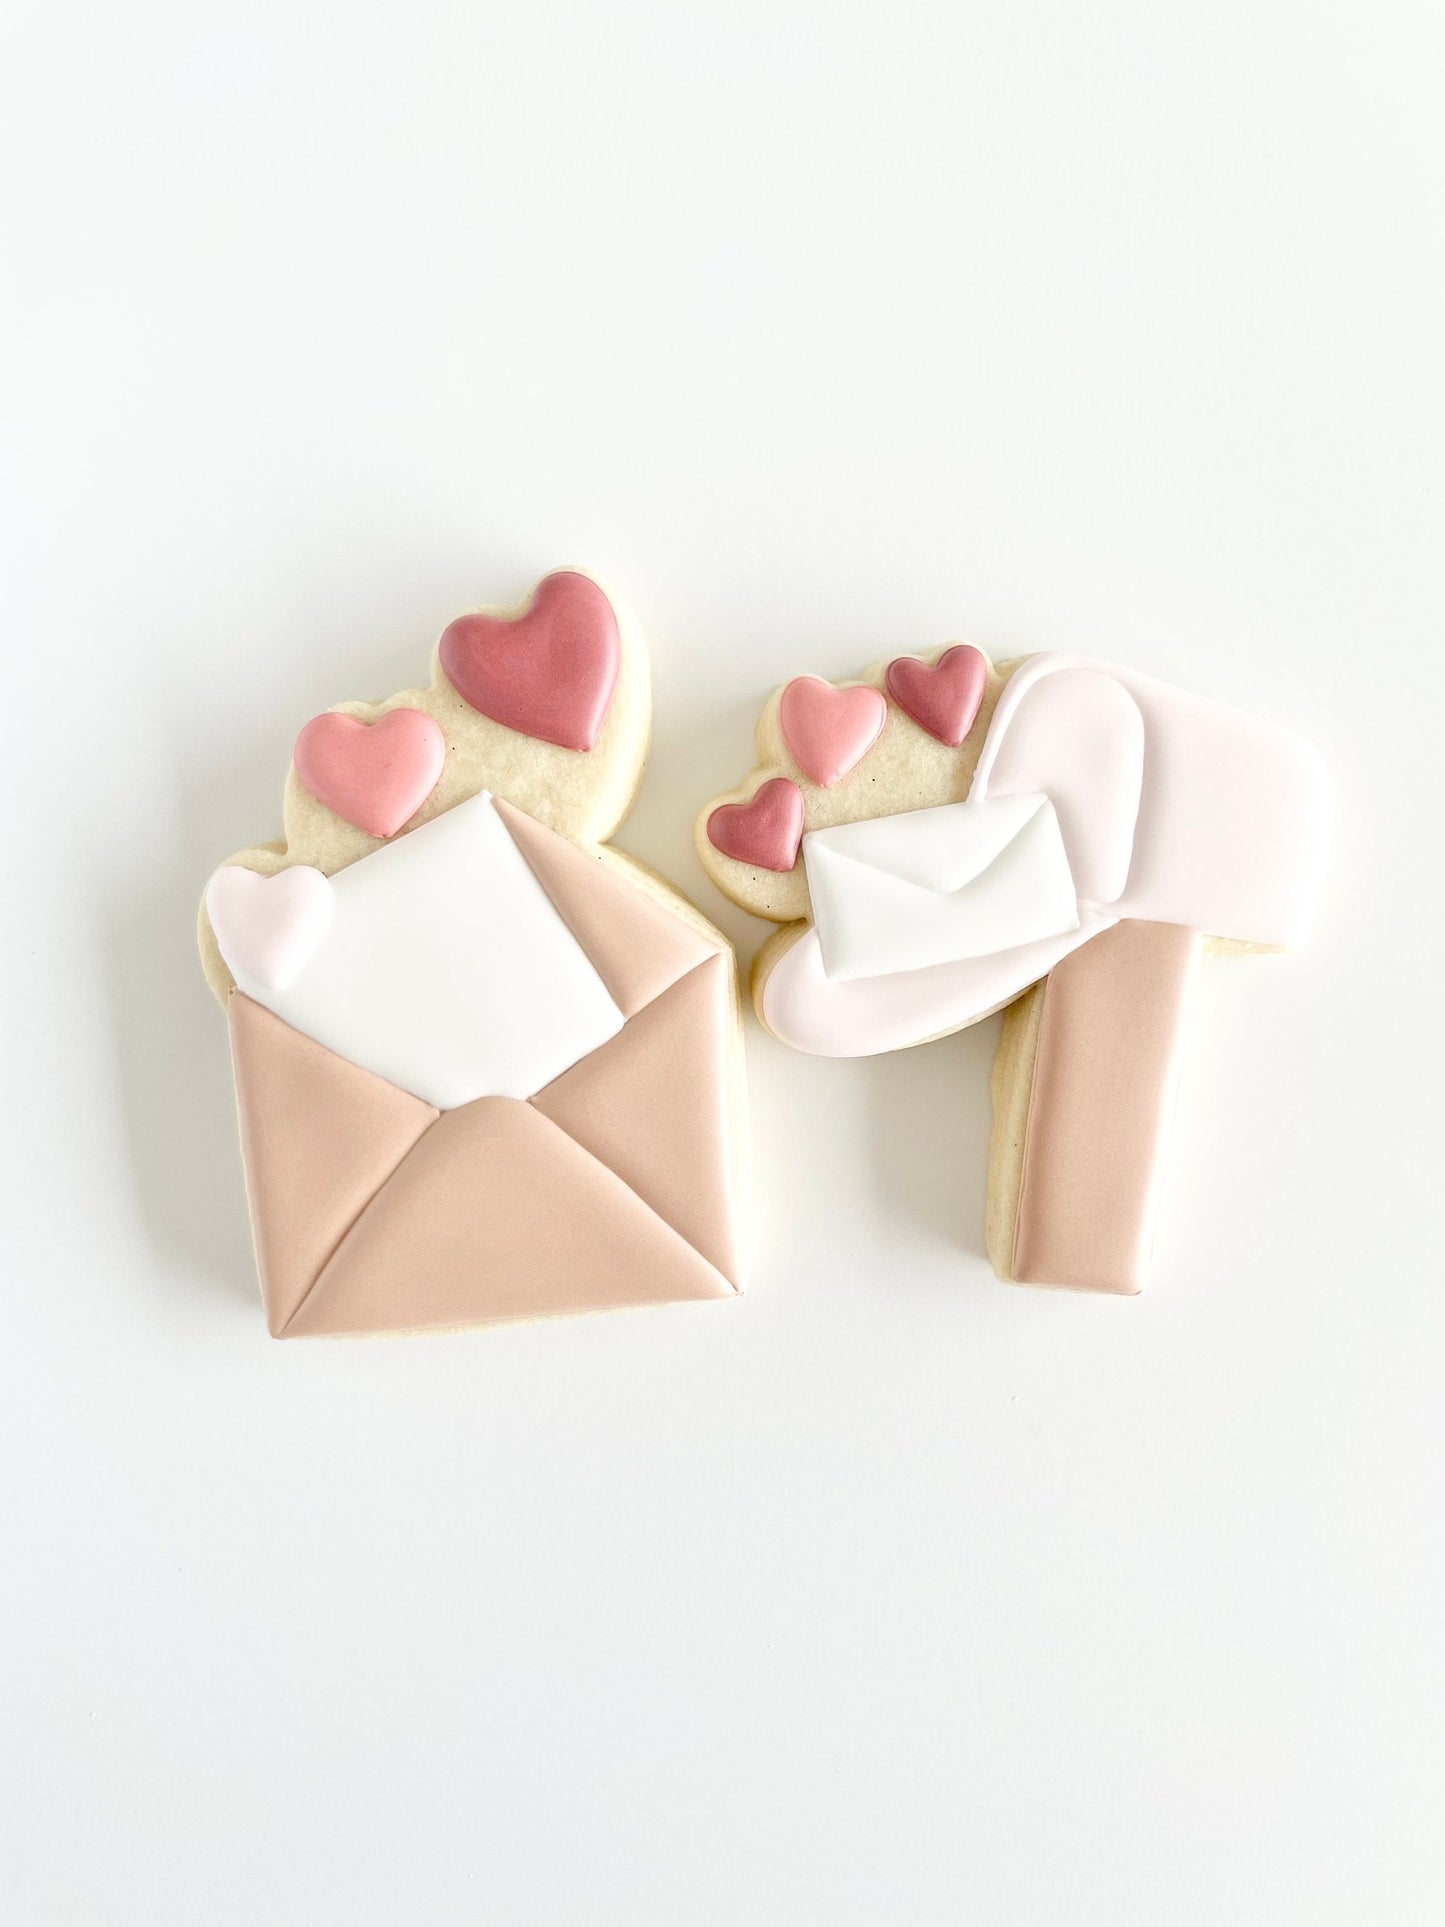 Mailbox with Love Letter Cookie Cutter